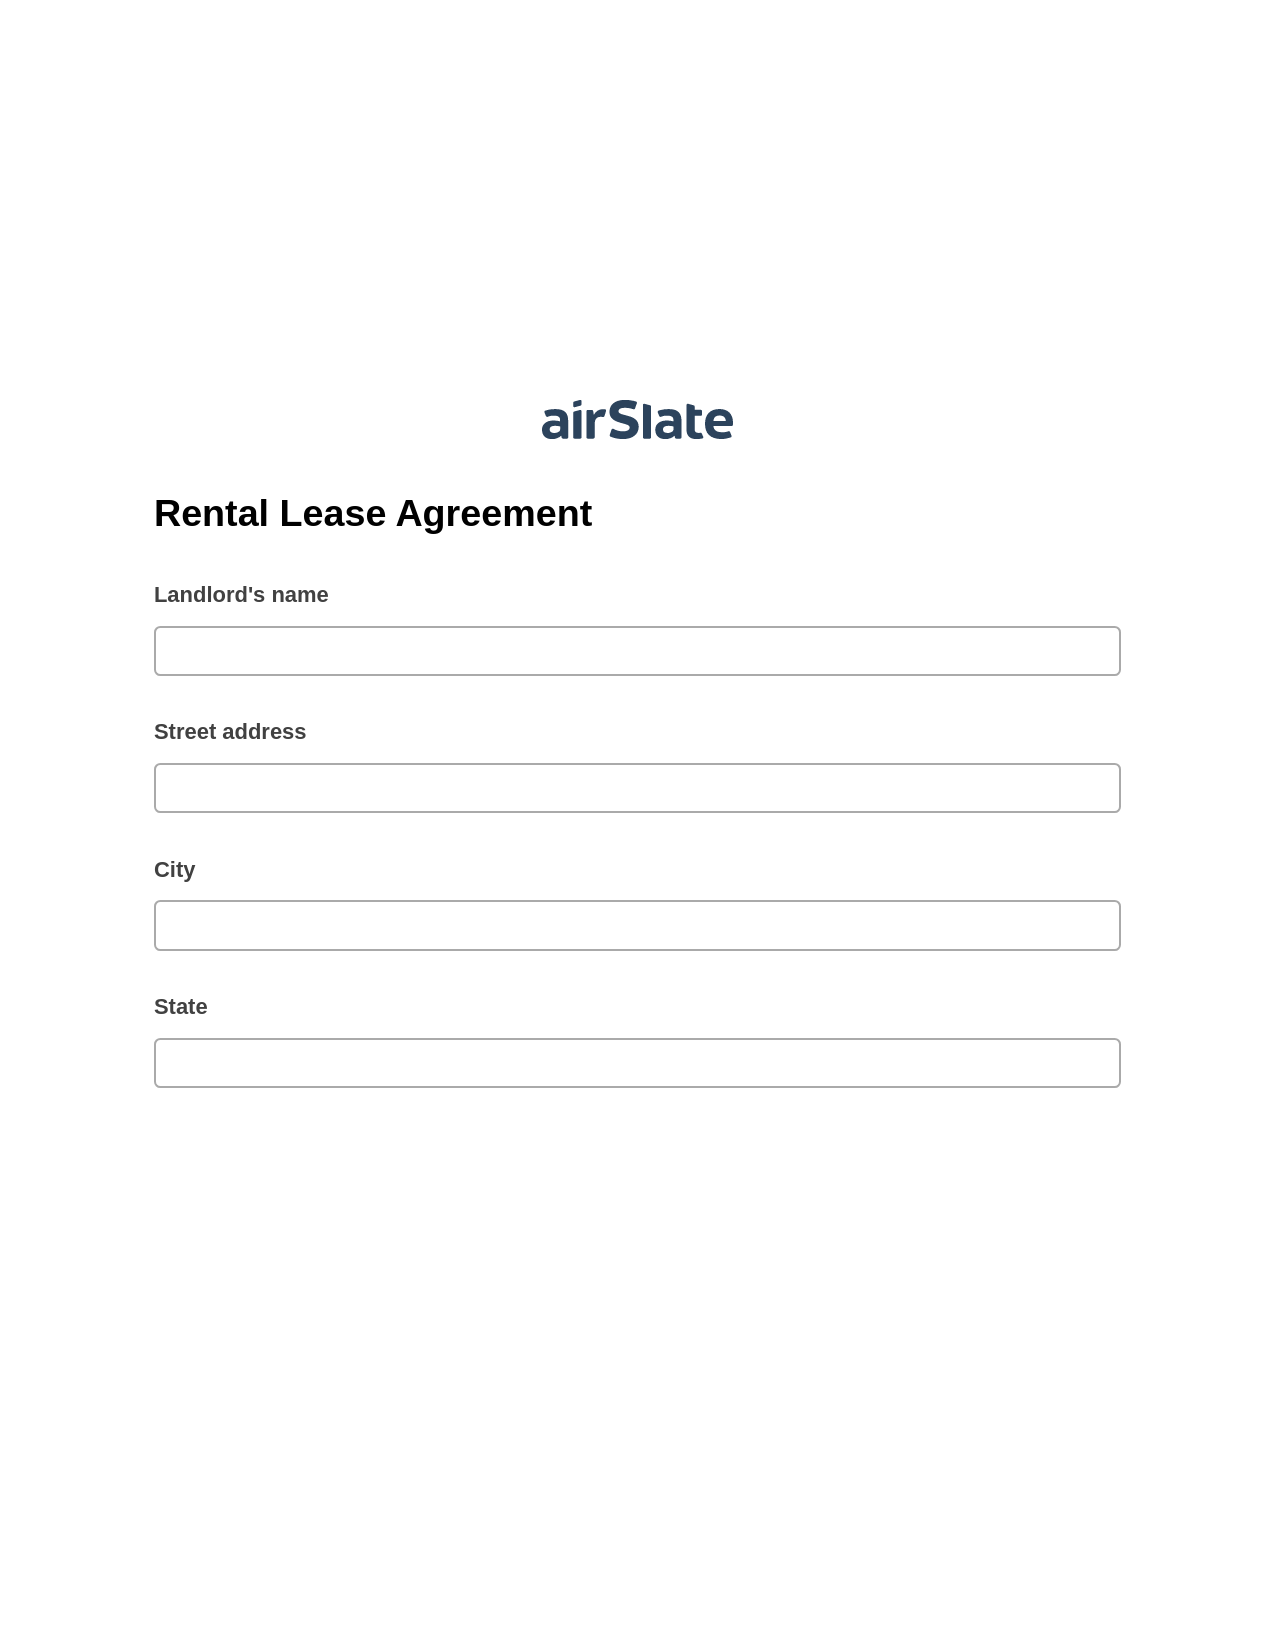 Rental Lease Agreement Pre-fill from Excel Spreadsheet Bot, Create Slate every Google Sheet Update Bot, Export to Formstack Documents Bot